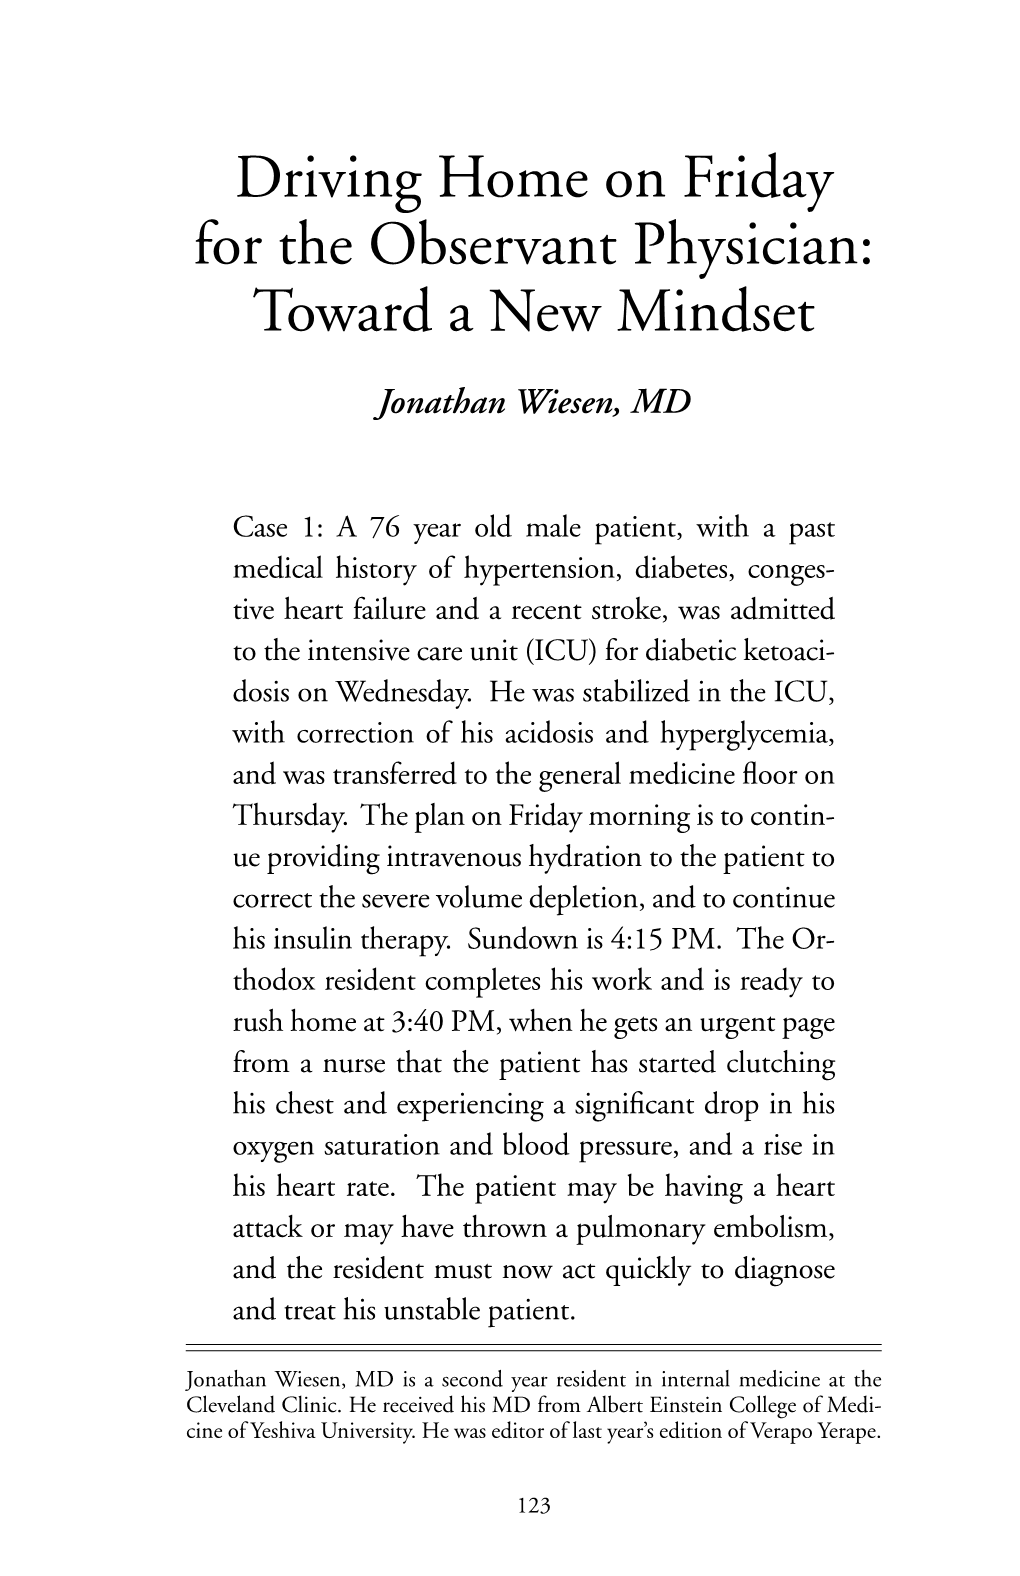 Driving Home on Friday for the Observant Physician: Toward a New Mindset